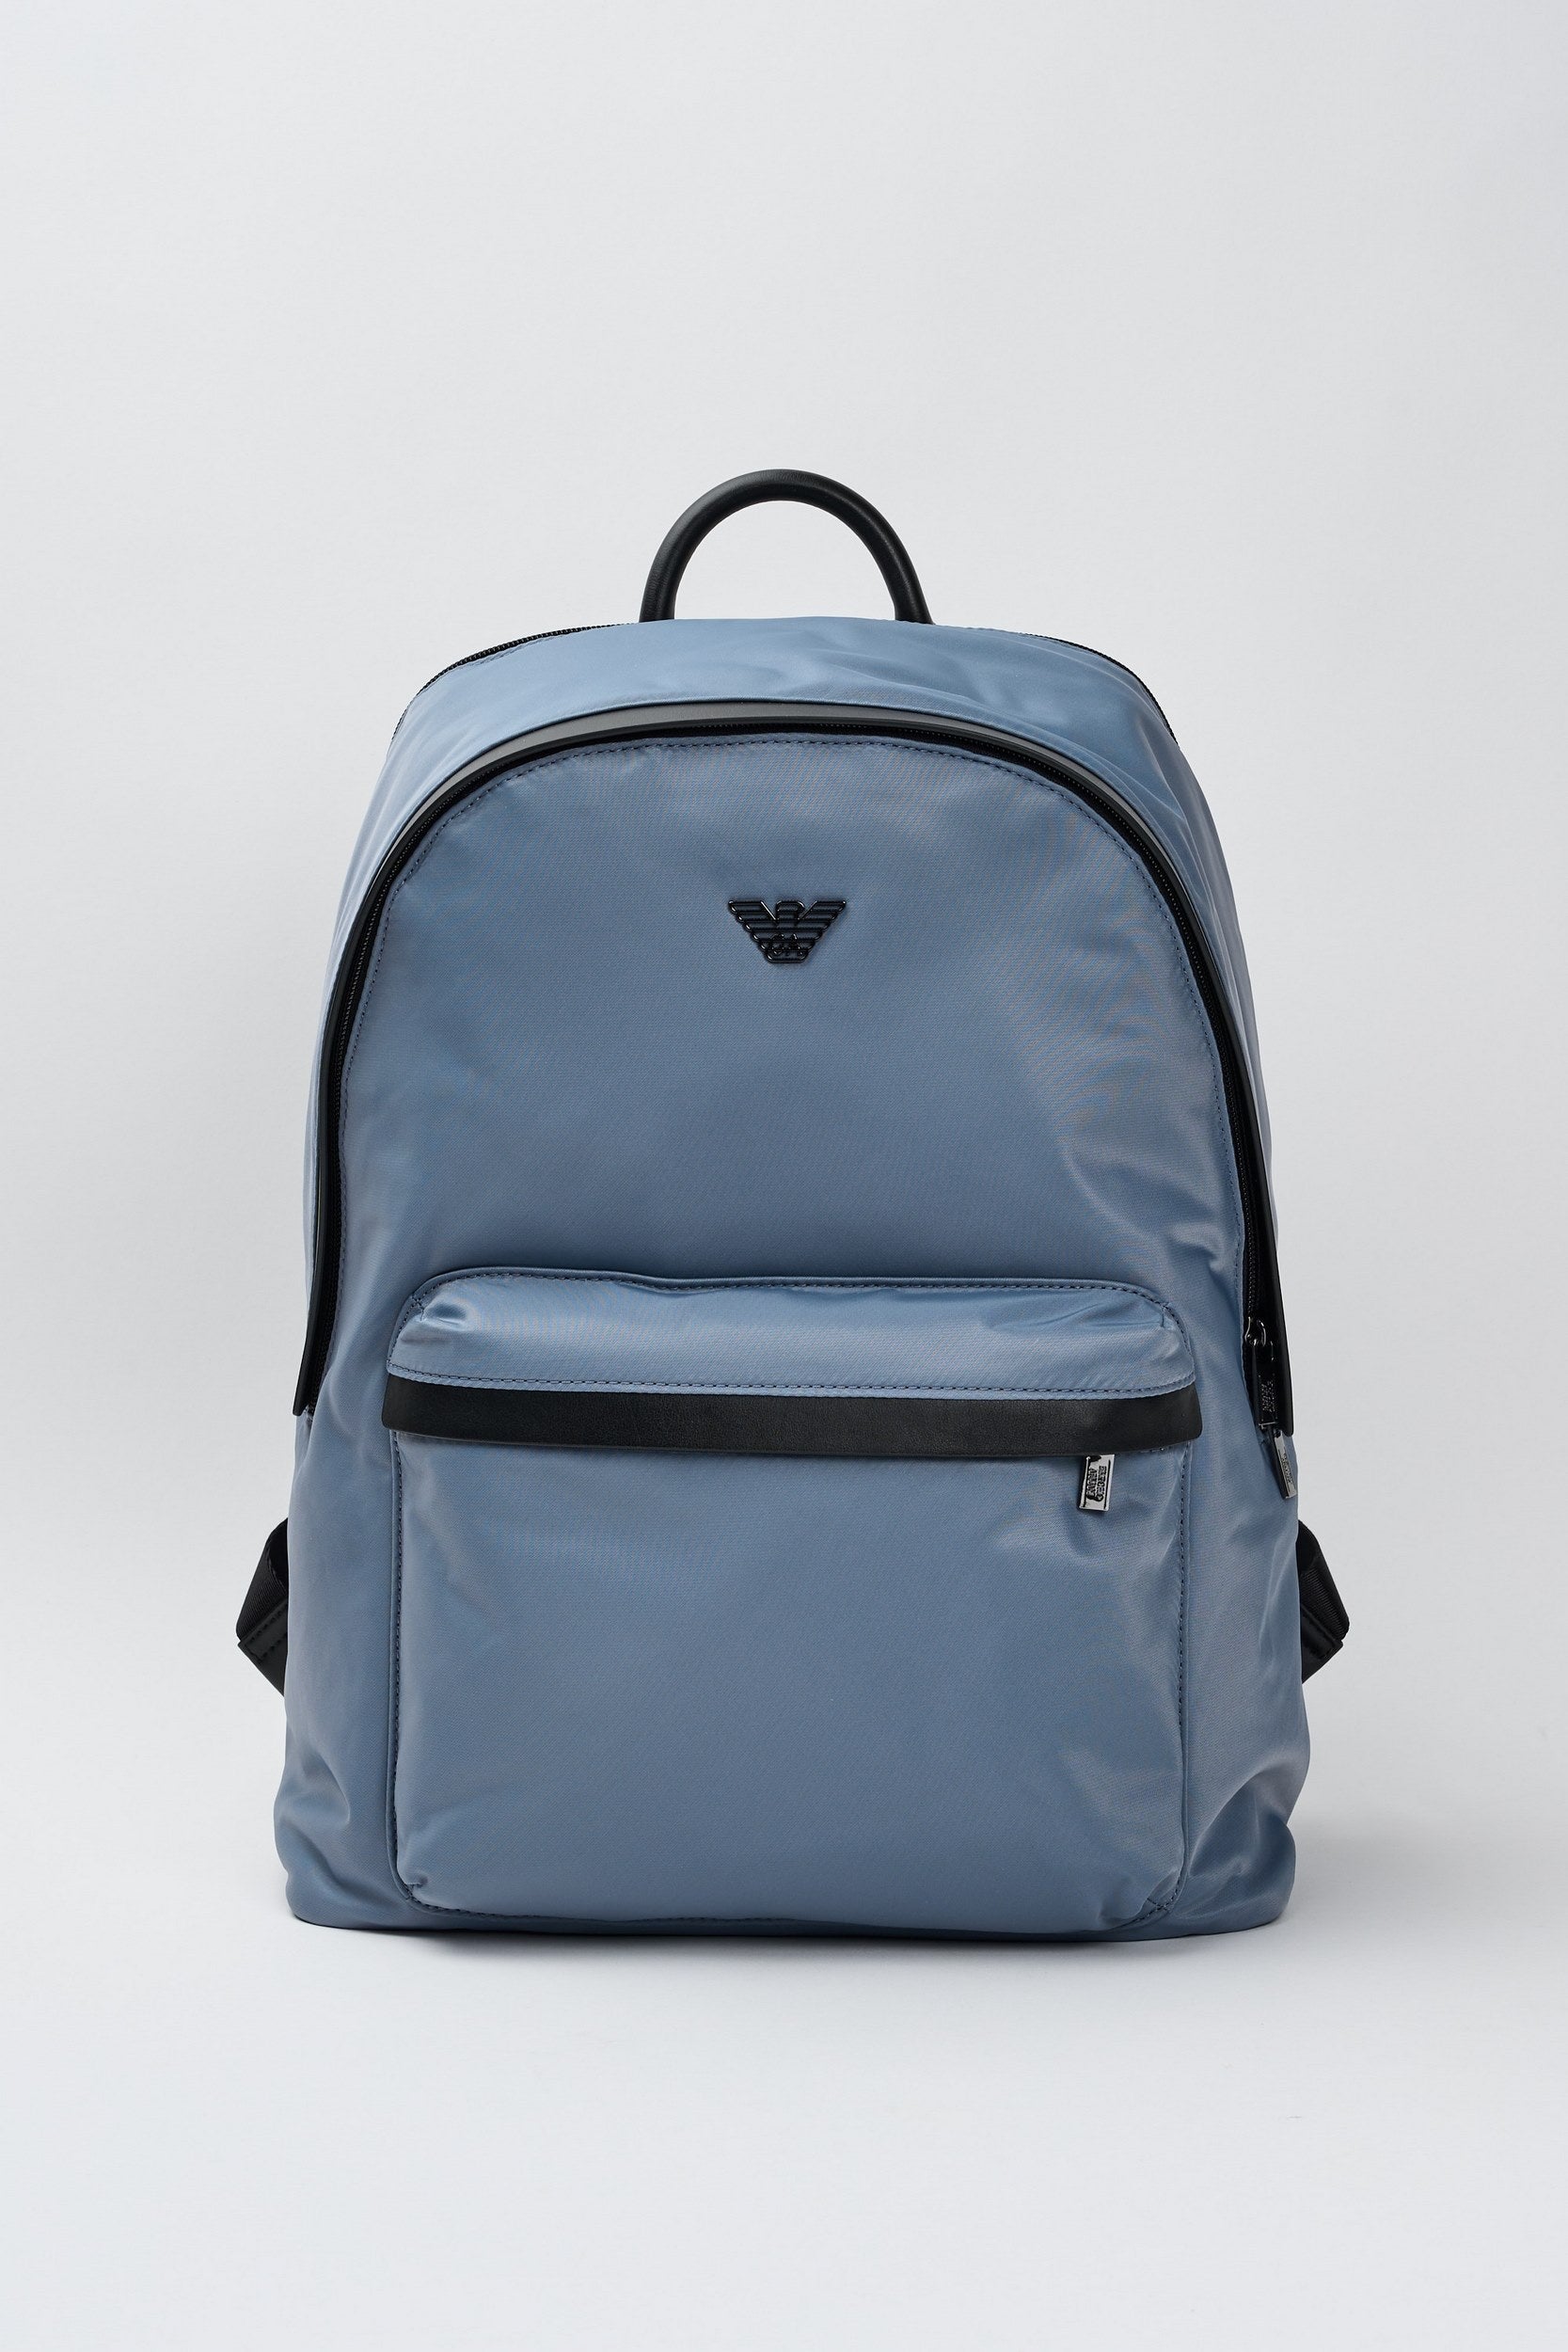 Emporio Armani Backpack Sustainability Values in Recycled Blue Nylon-1